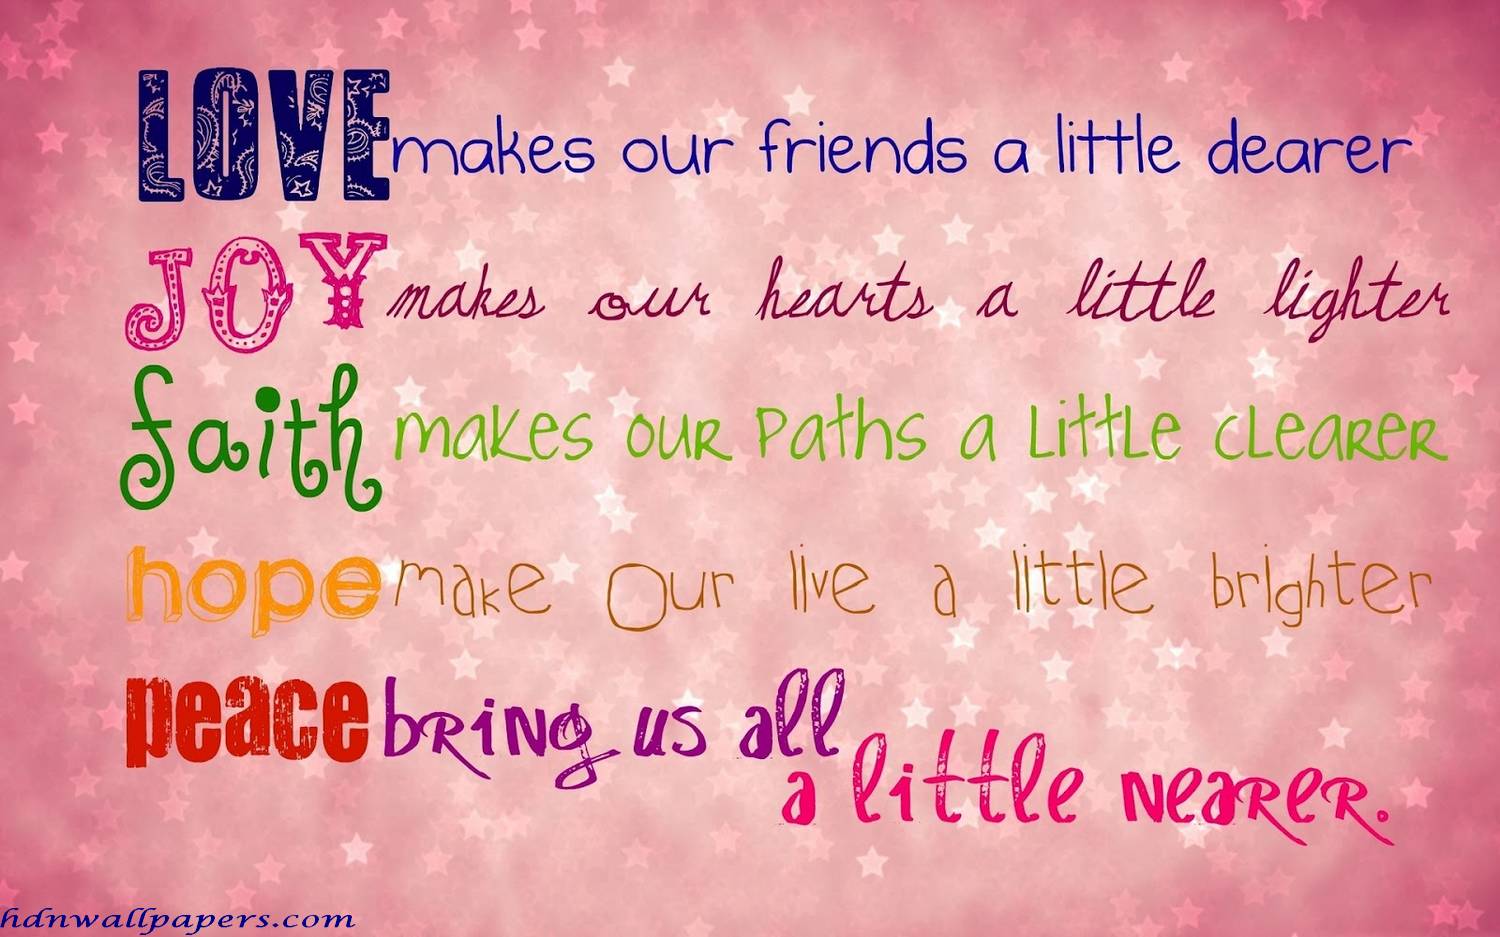 Cute Quotes Wallpaper Free Cute Quotes Background